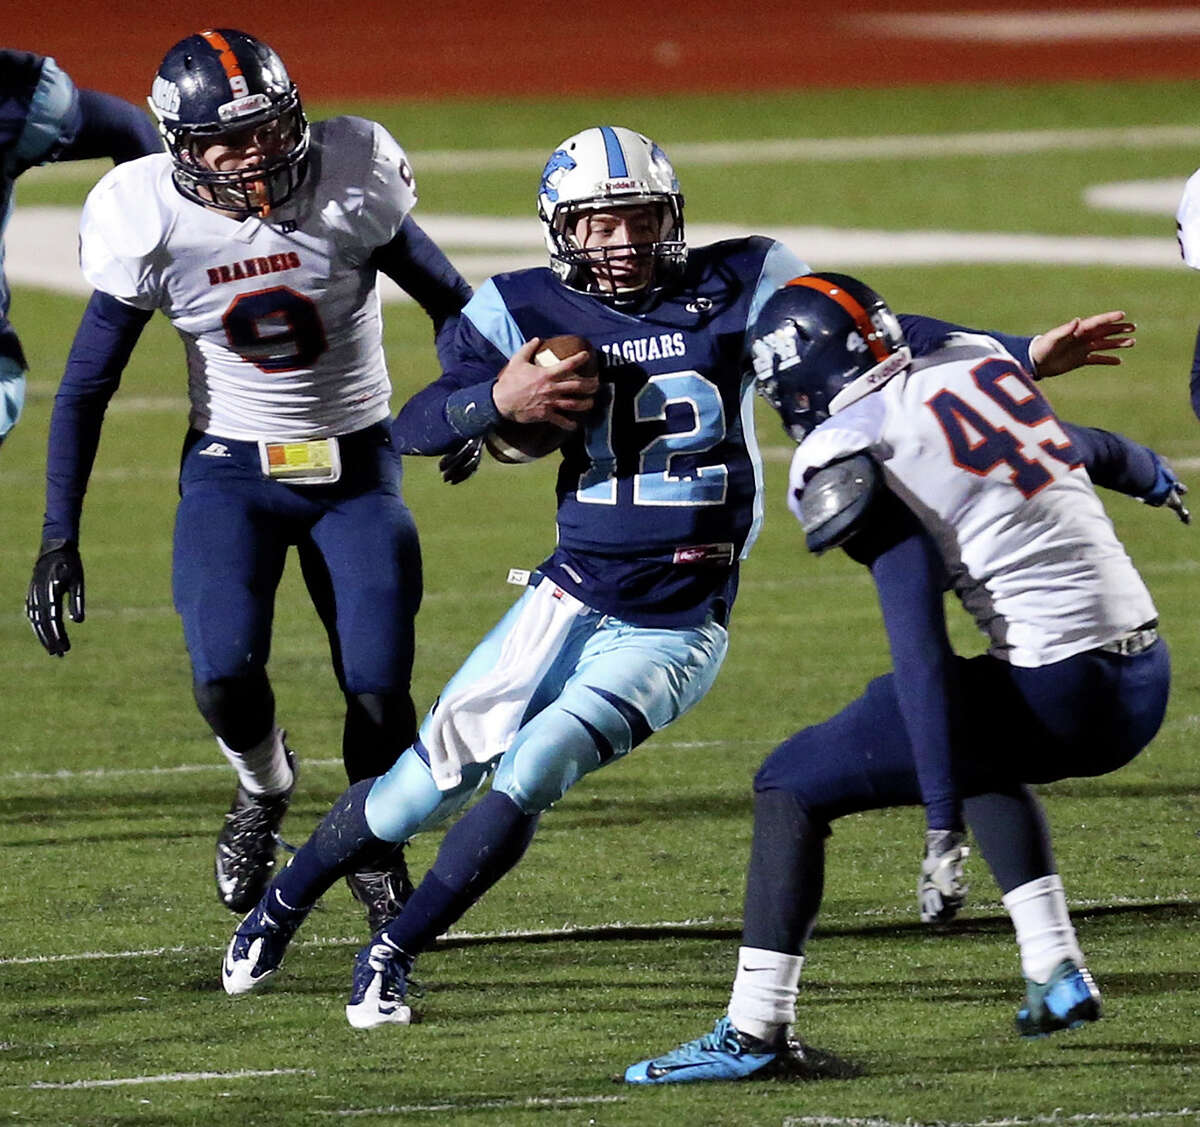 Johnson's Hunter Rittimann looks for room between Brandeis' Brandon Smyth (left) and Darien Dunn during second half action of their Class 5A Division II area playoff game Friday Nov. 22, 2013 at Heroes Stadium. Johnson won 23-17 in overtime.